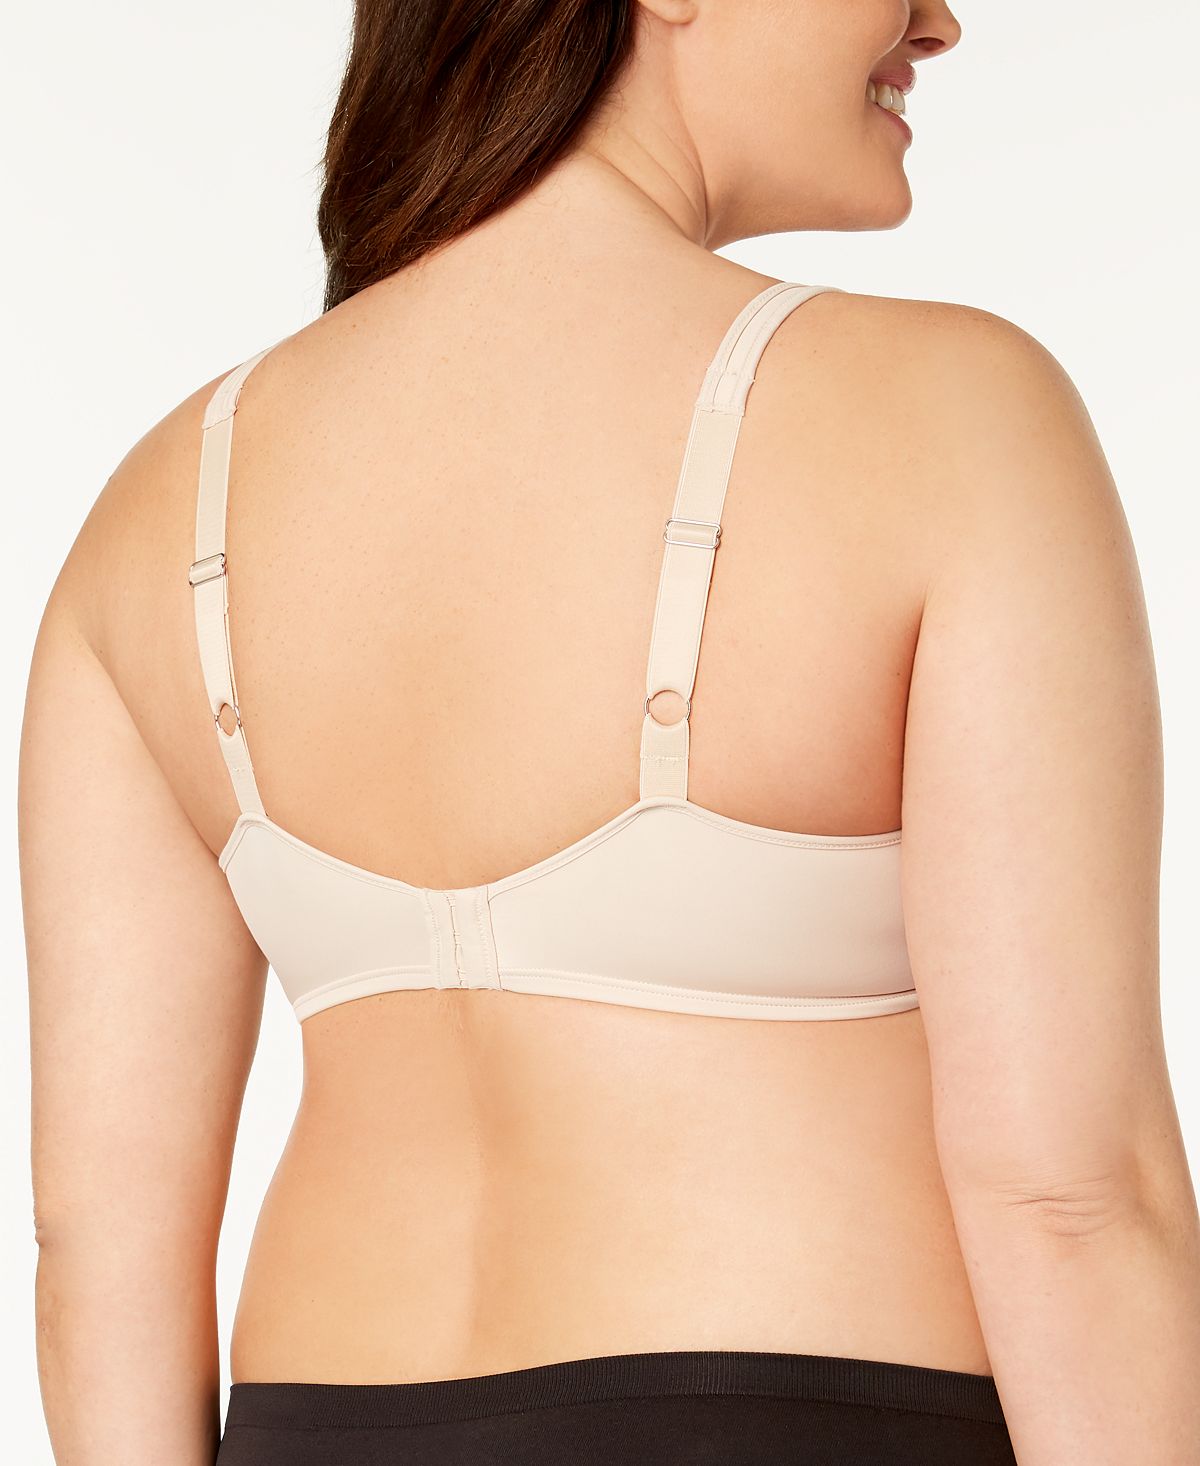 Passion for Comfort Back Smoothing Underwire Bra